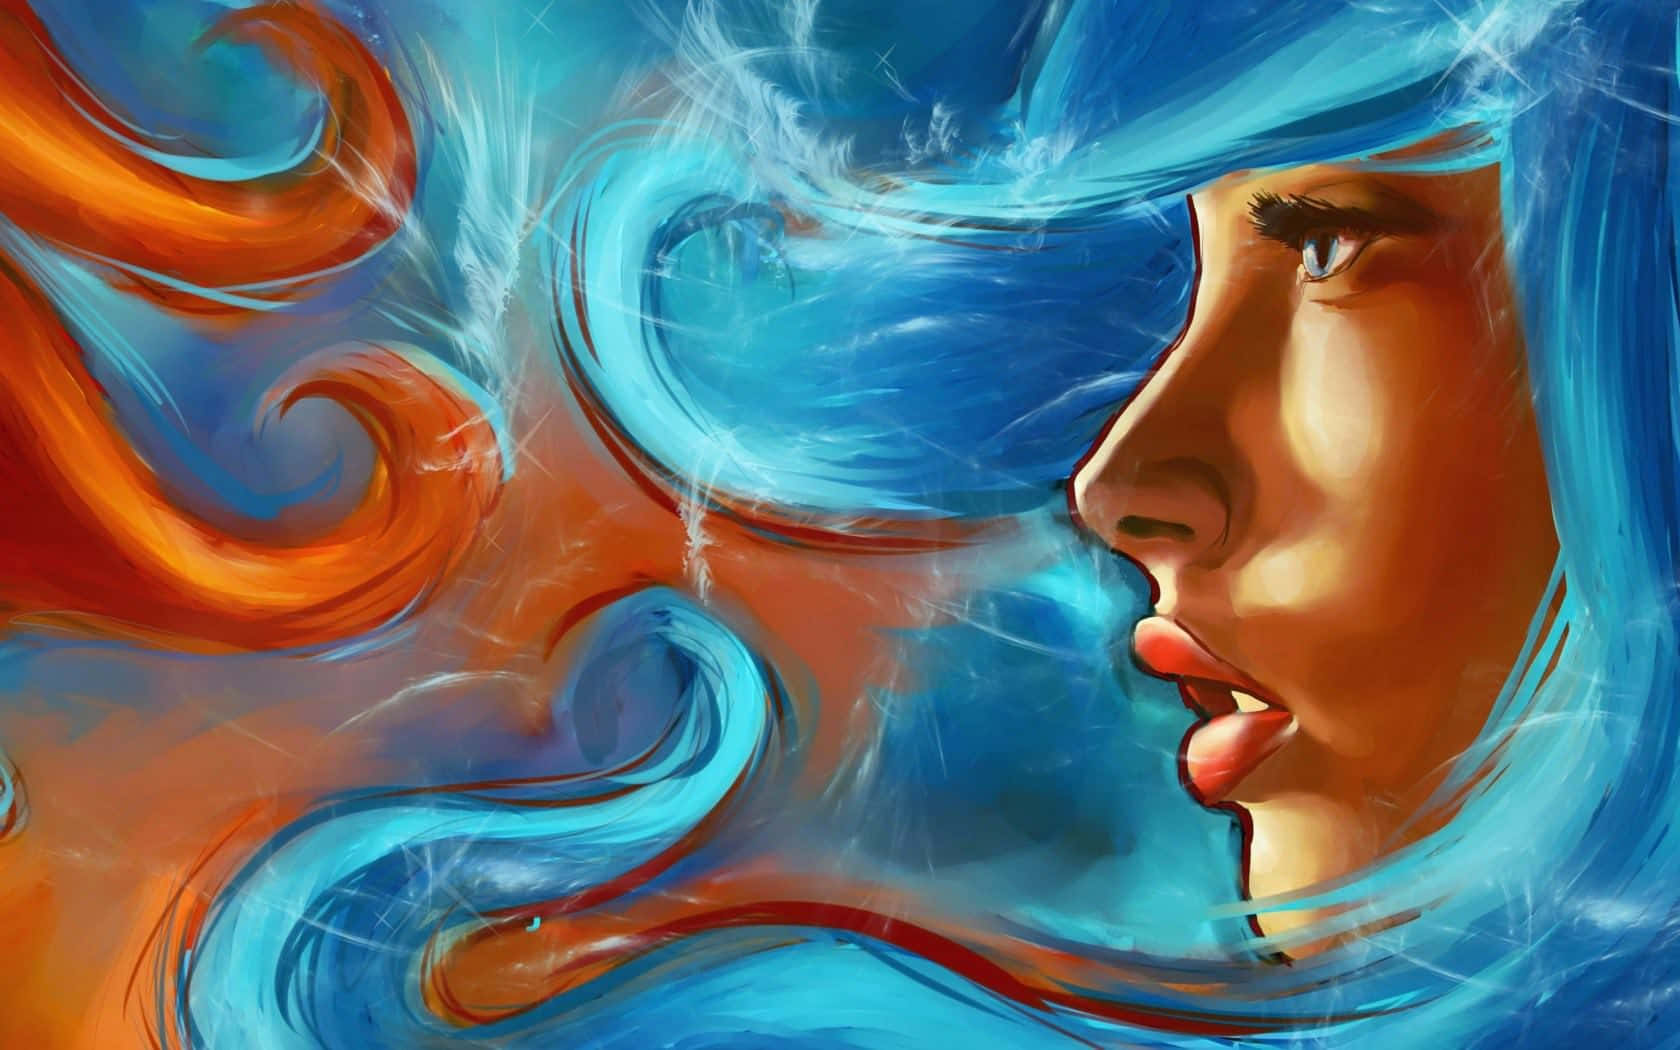 The Abstract Face Of The Girl Paint Background